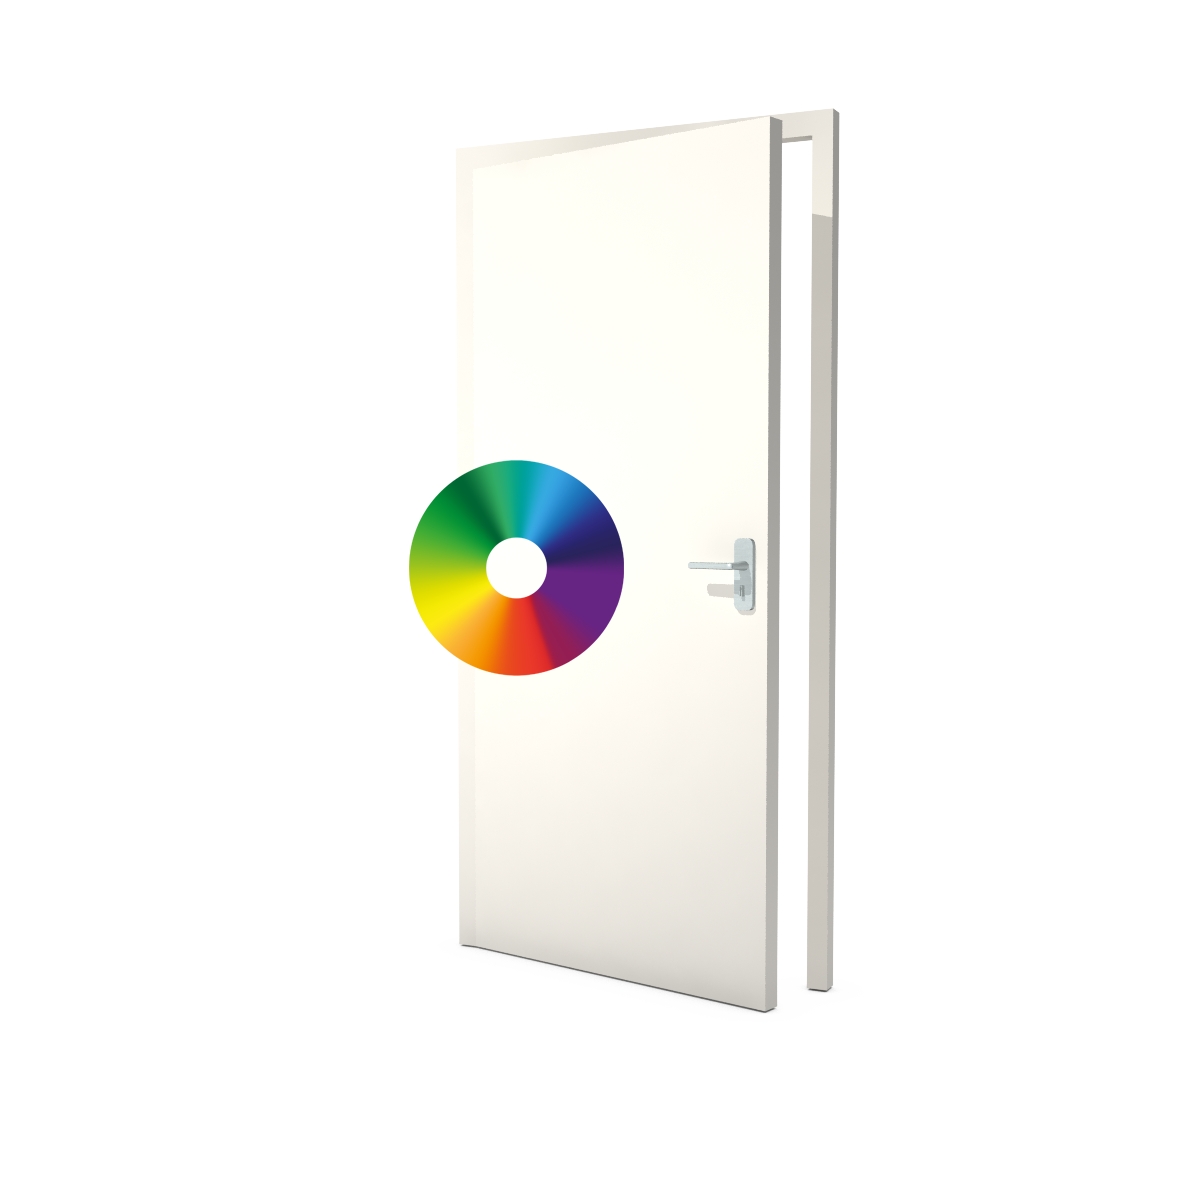 Single painted door - Choice of color